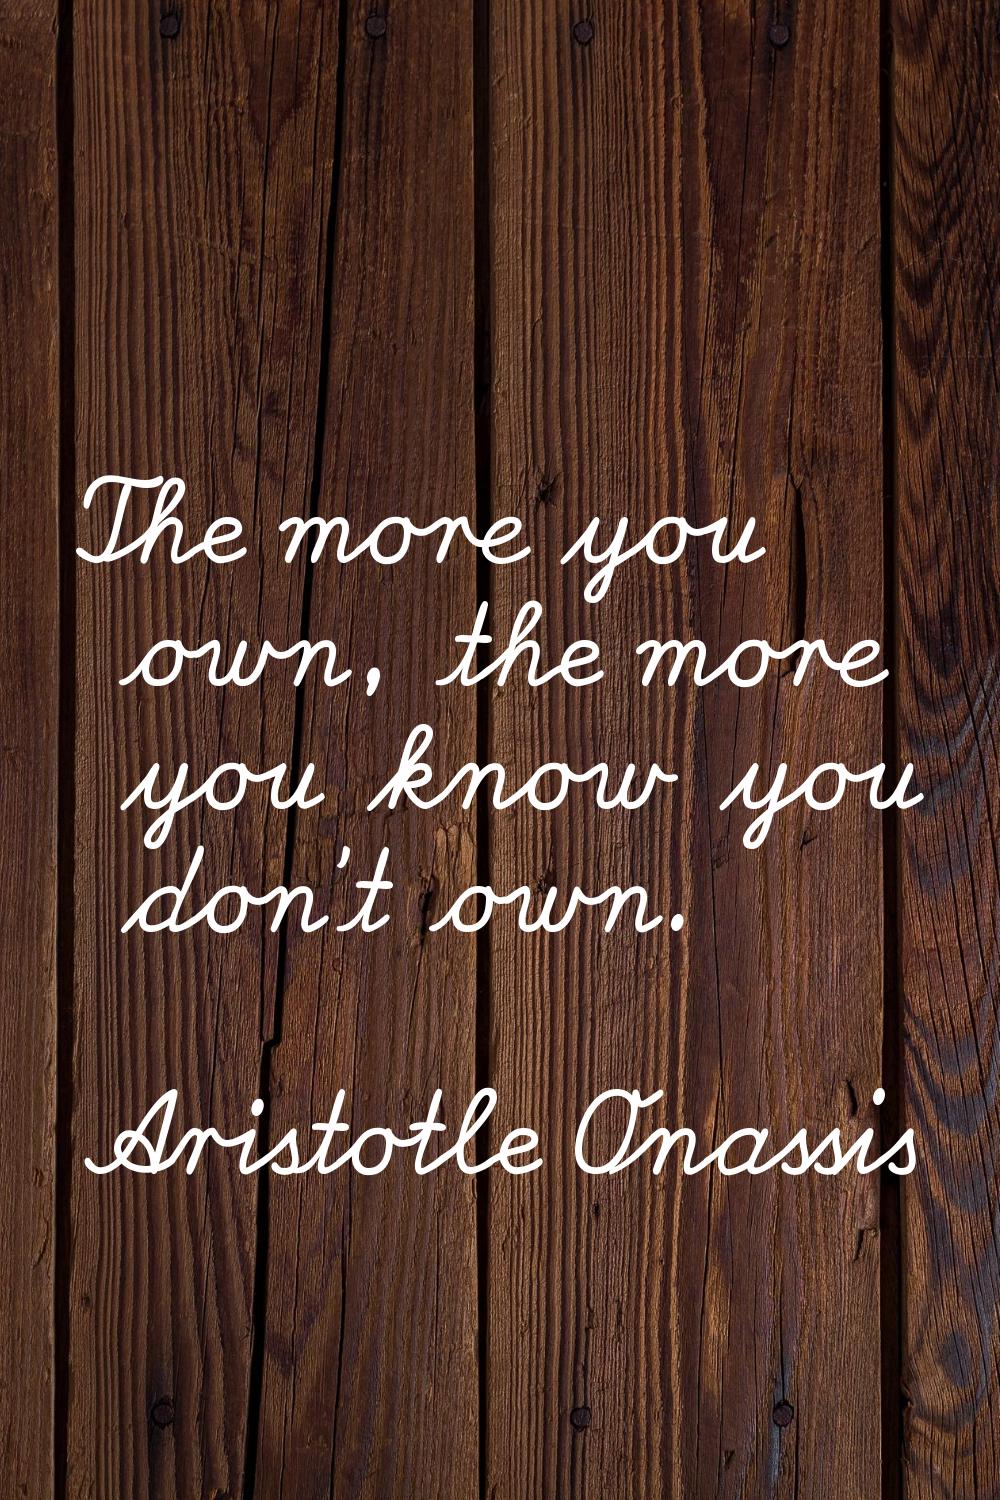 The more you own, the more you know you don't own.